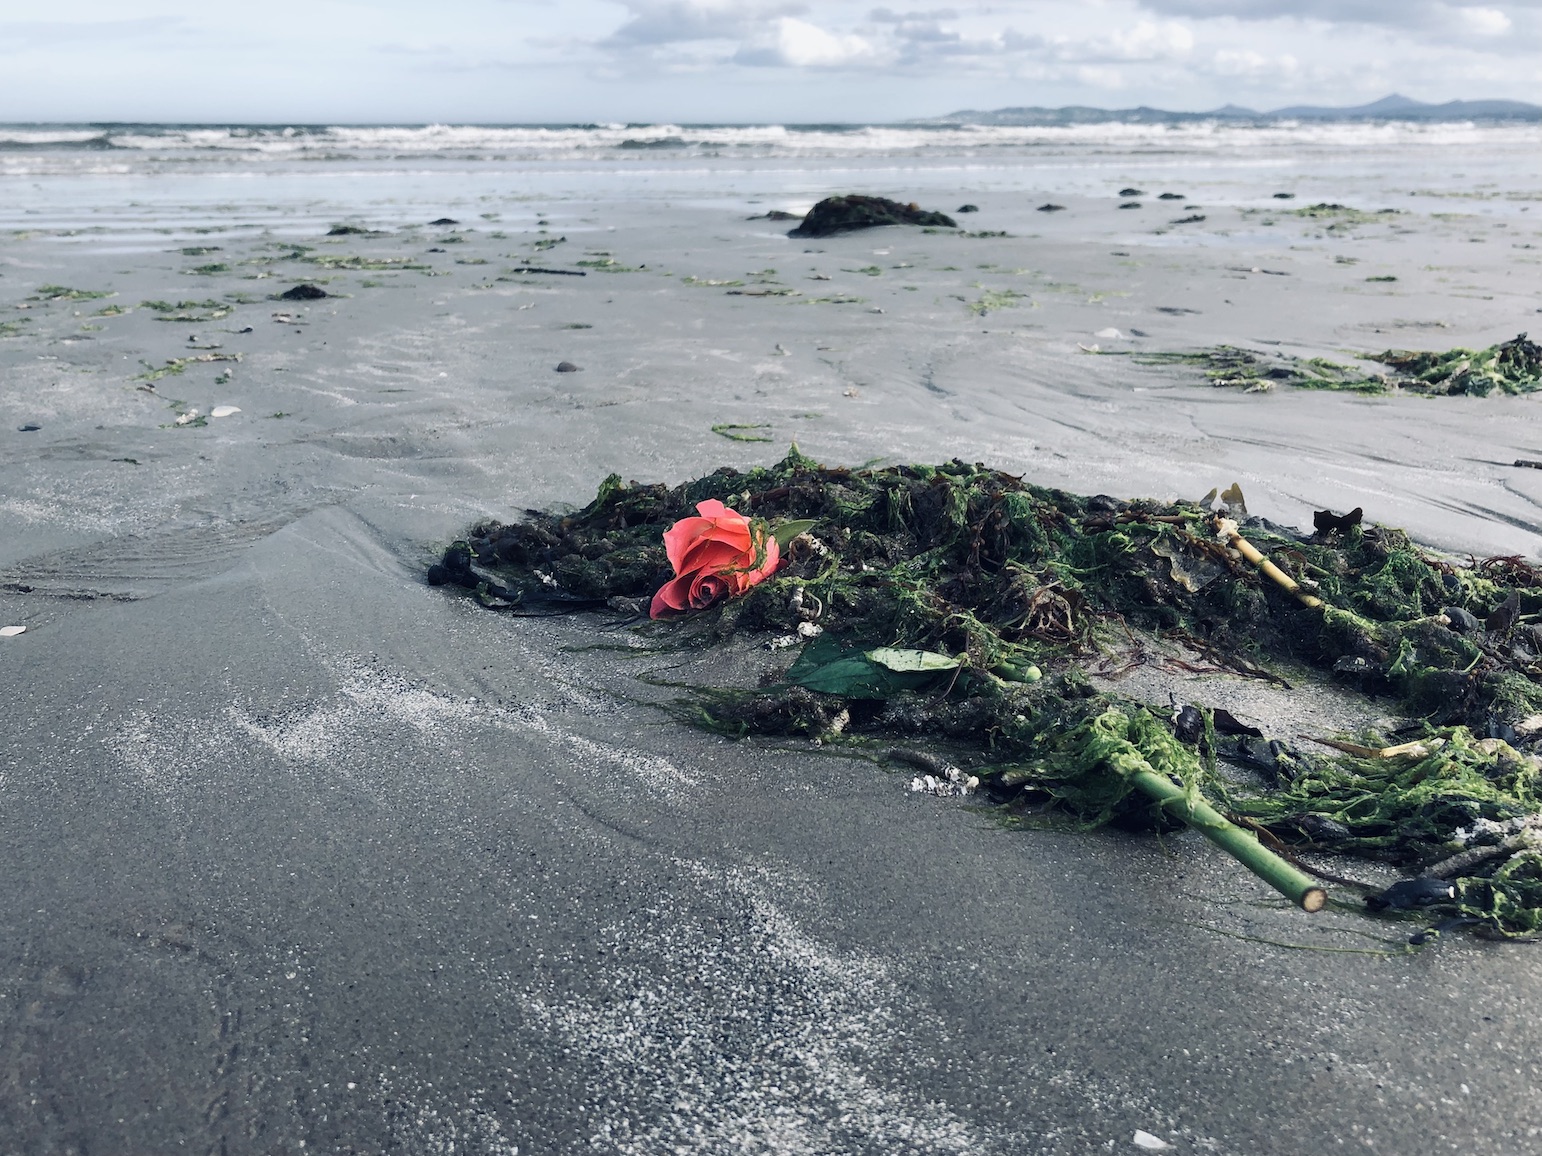 A rose washed up on the beach, at North Bull Island in Dublin.